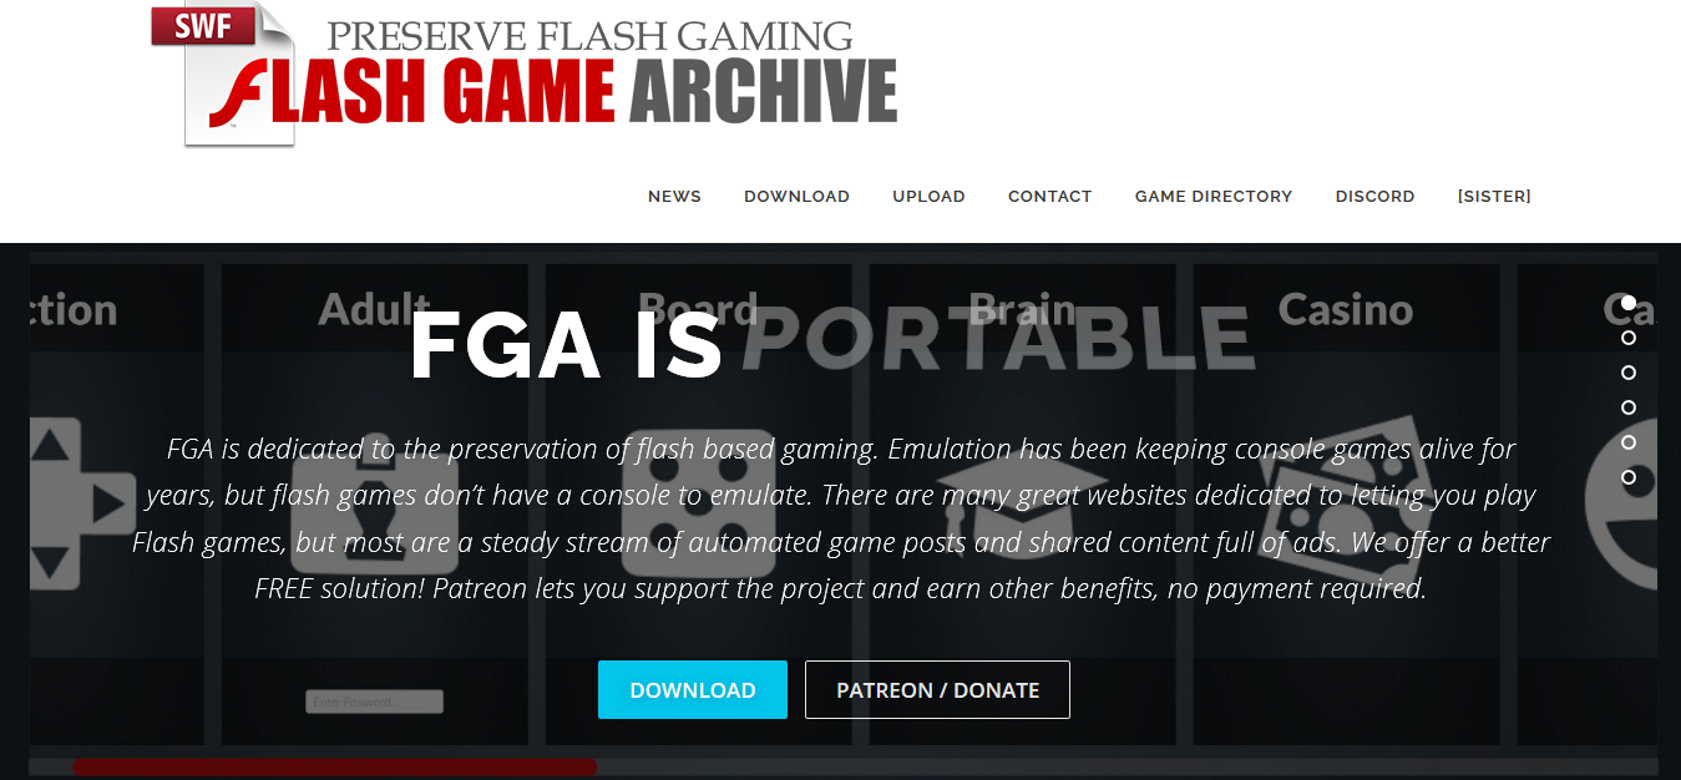 A screenshot of Flash Game Archive's home page